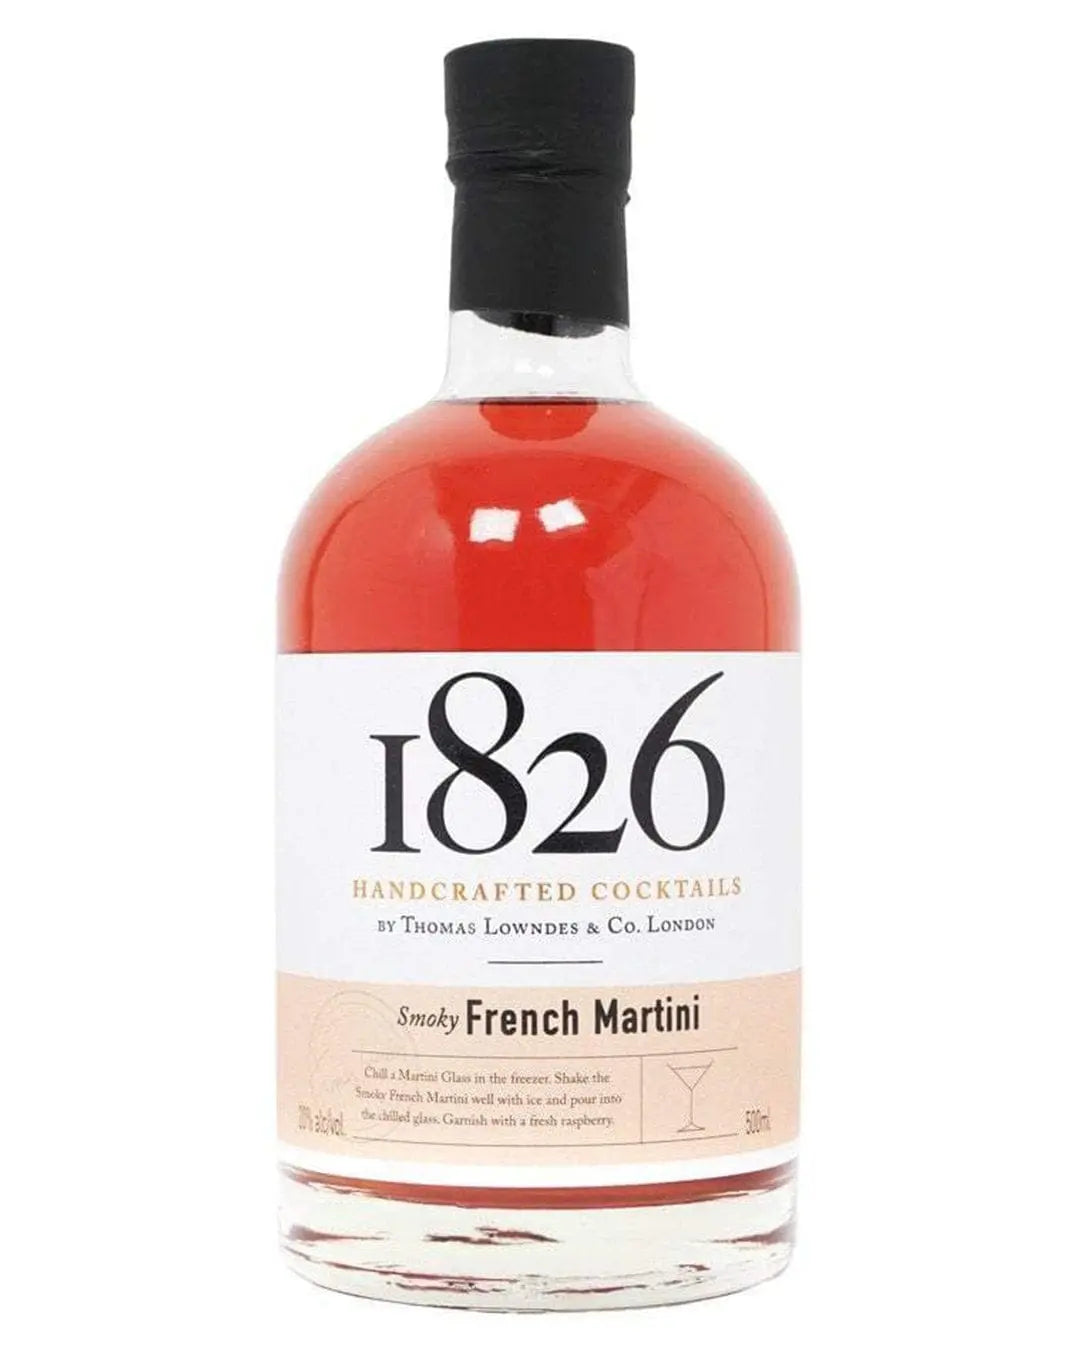 1826 Laphroaig Smoky French Martini Handcrafted Premixed Cocktail, 50 cl Ready Made Cocktails